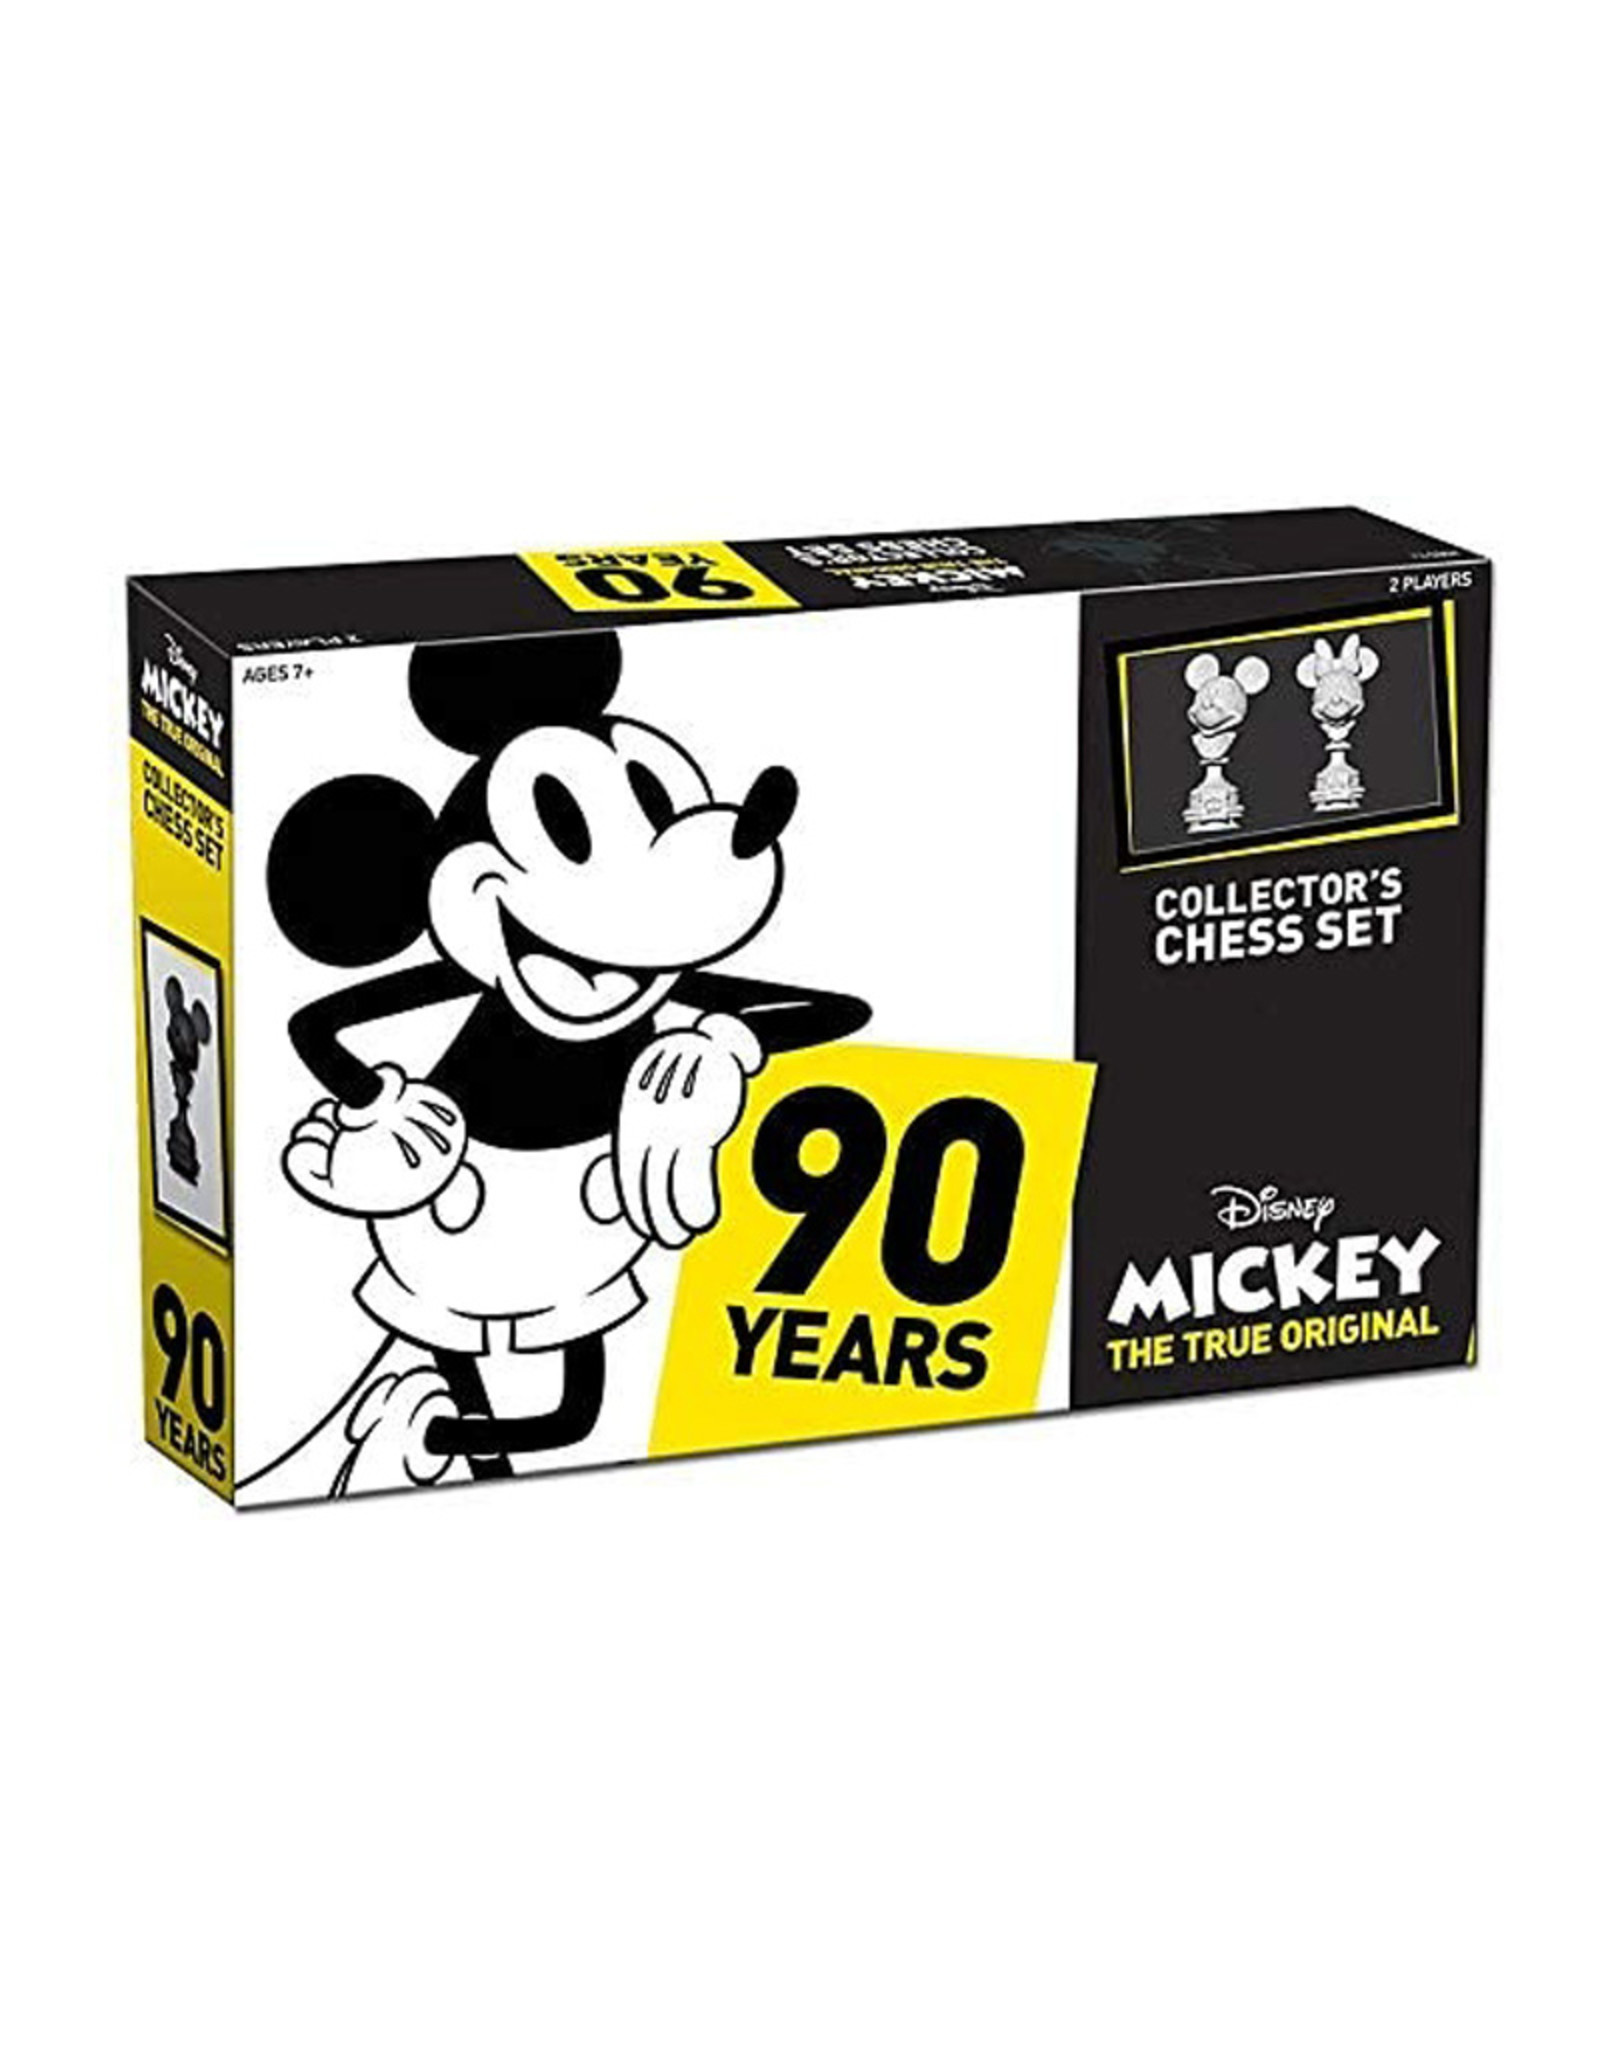 Usaopoly Chess: Mickey Mouse True Original